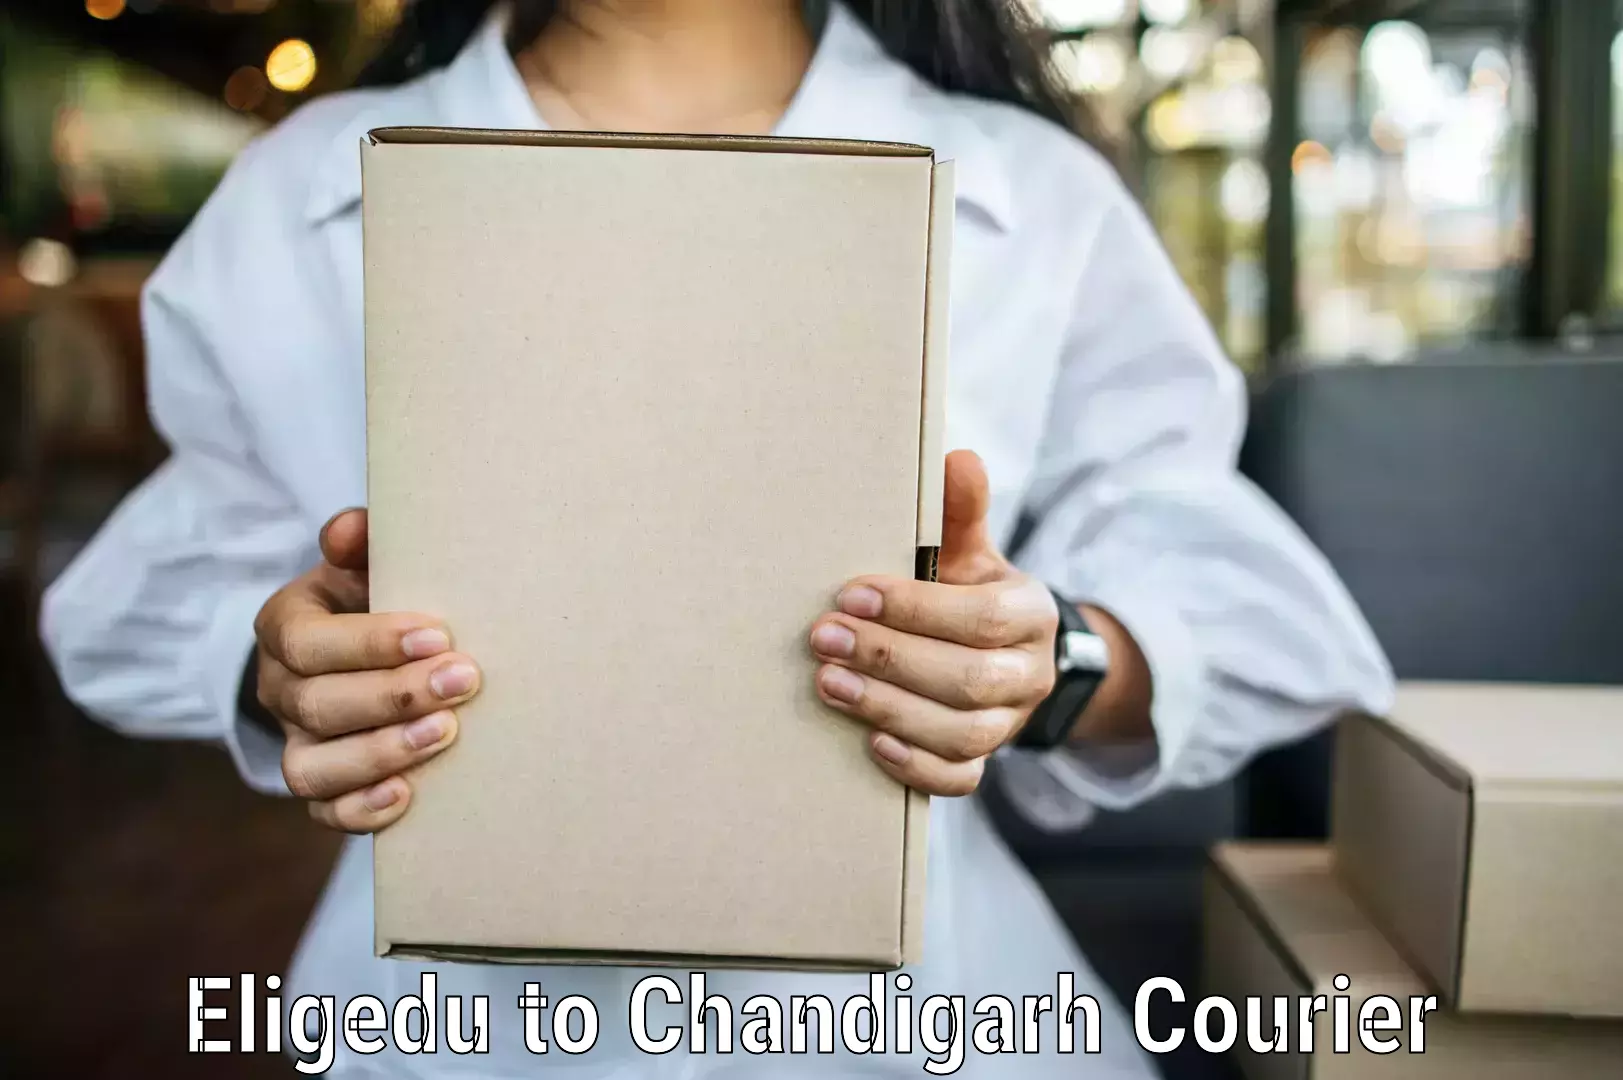 Courier rate comparison in Eligedu to Panjab University Chandigarh